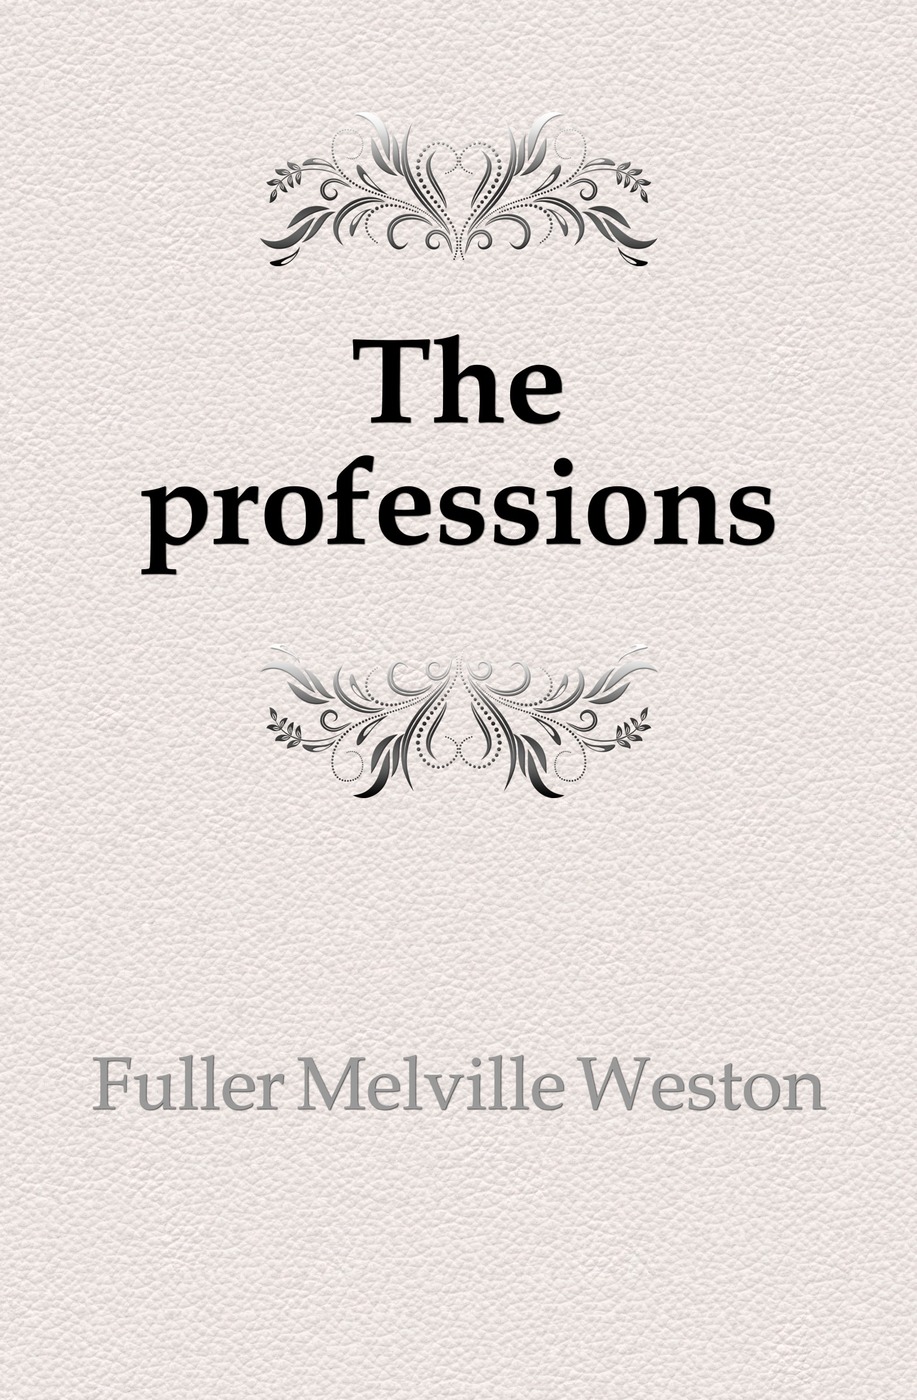 The professions